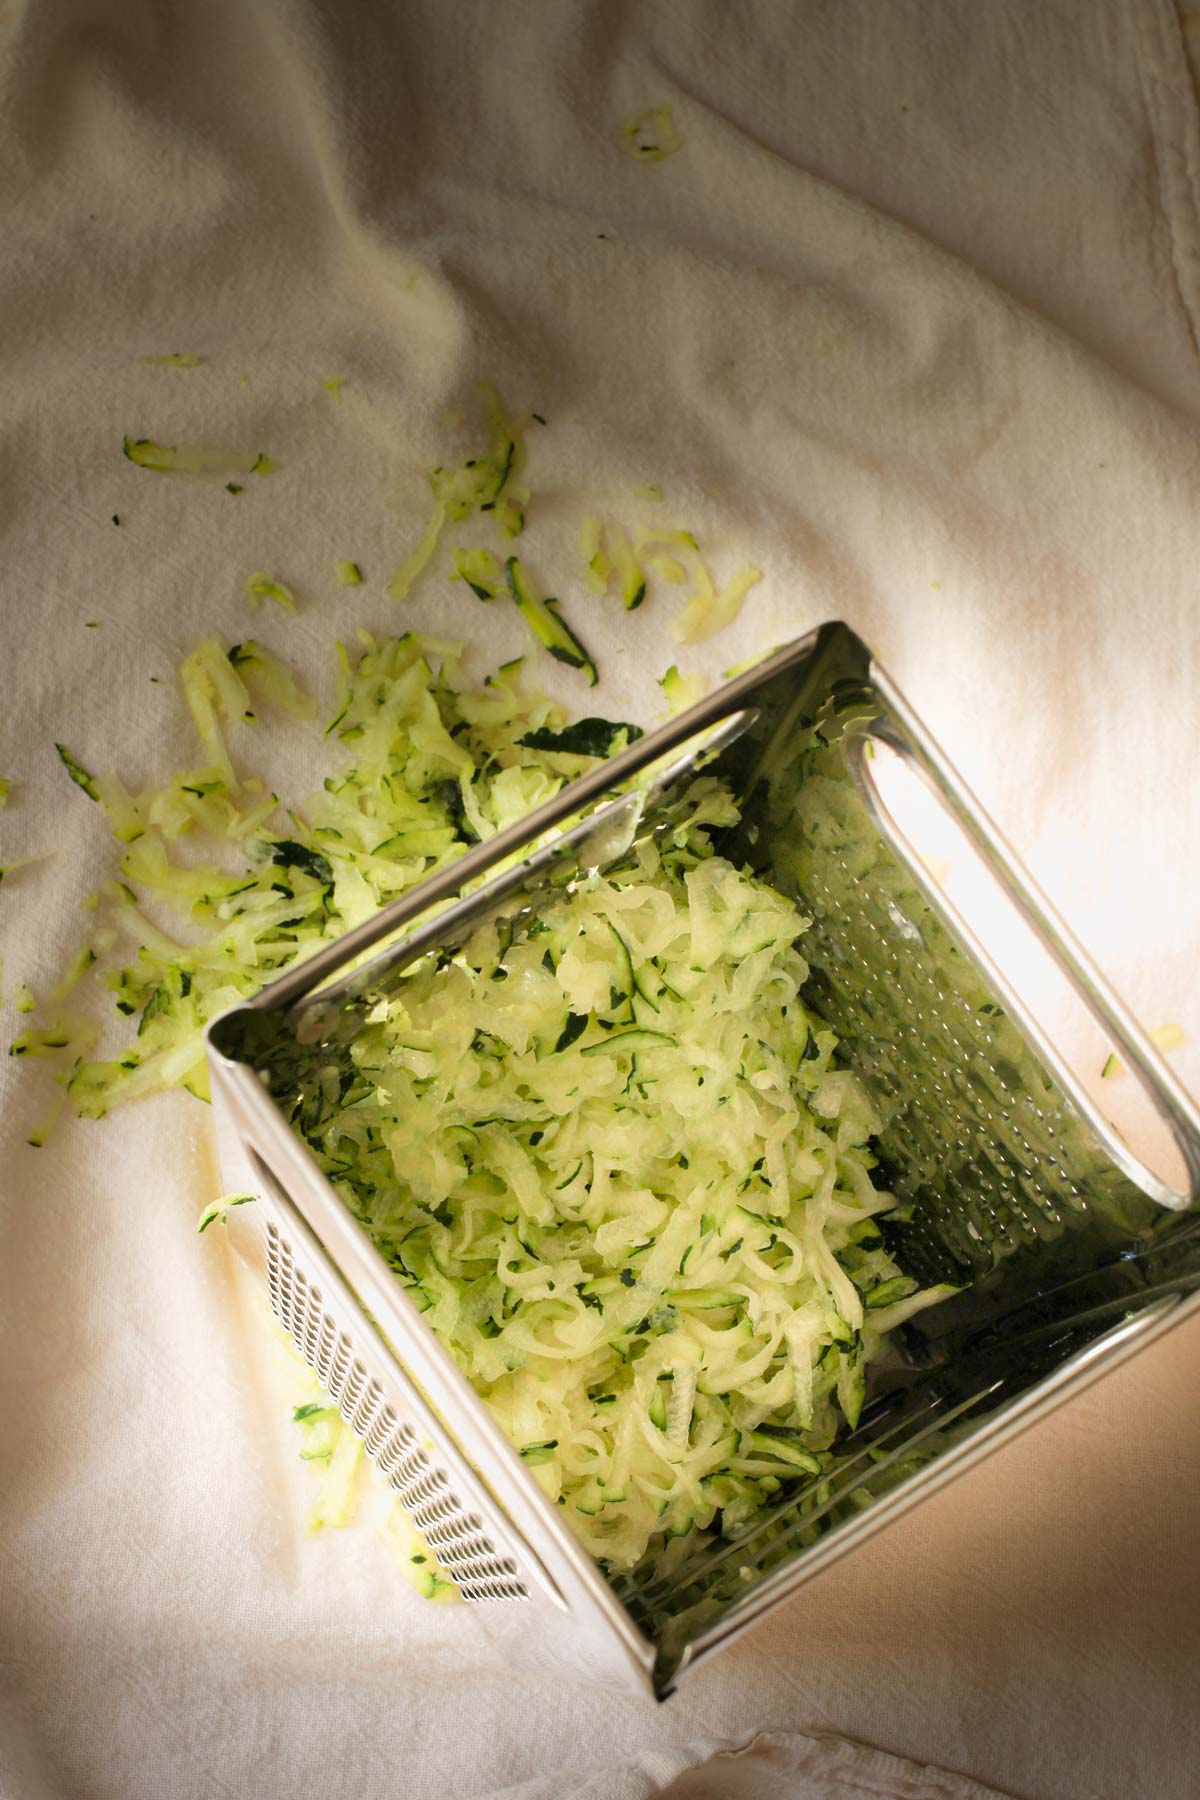 box grater on white tea towel with shredded zucchini.